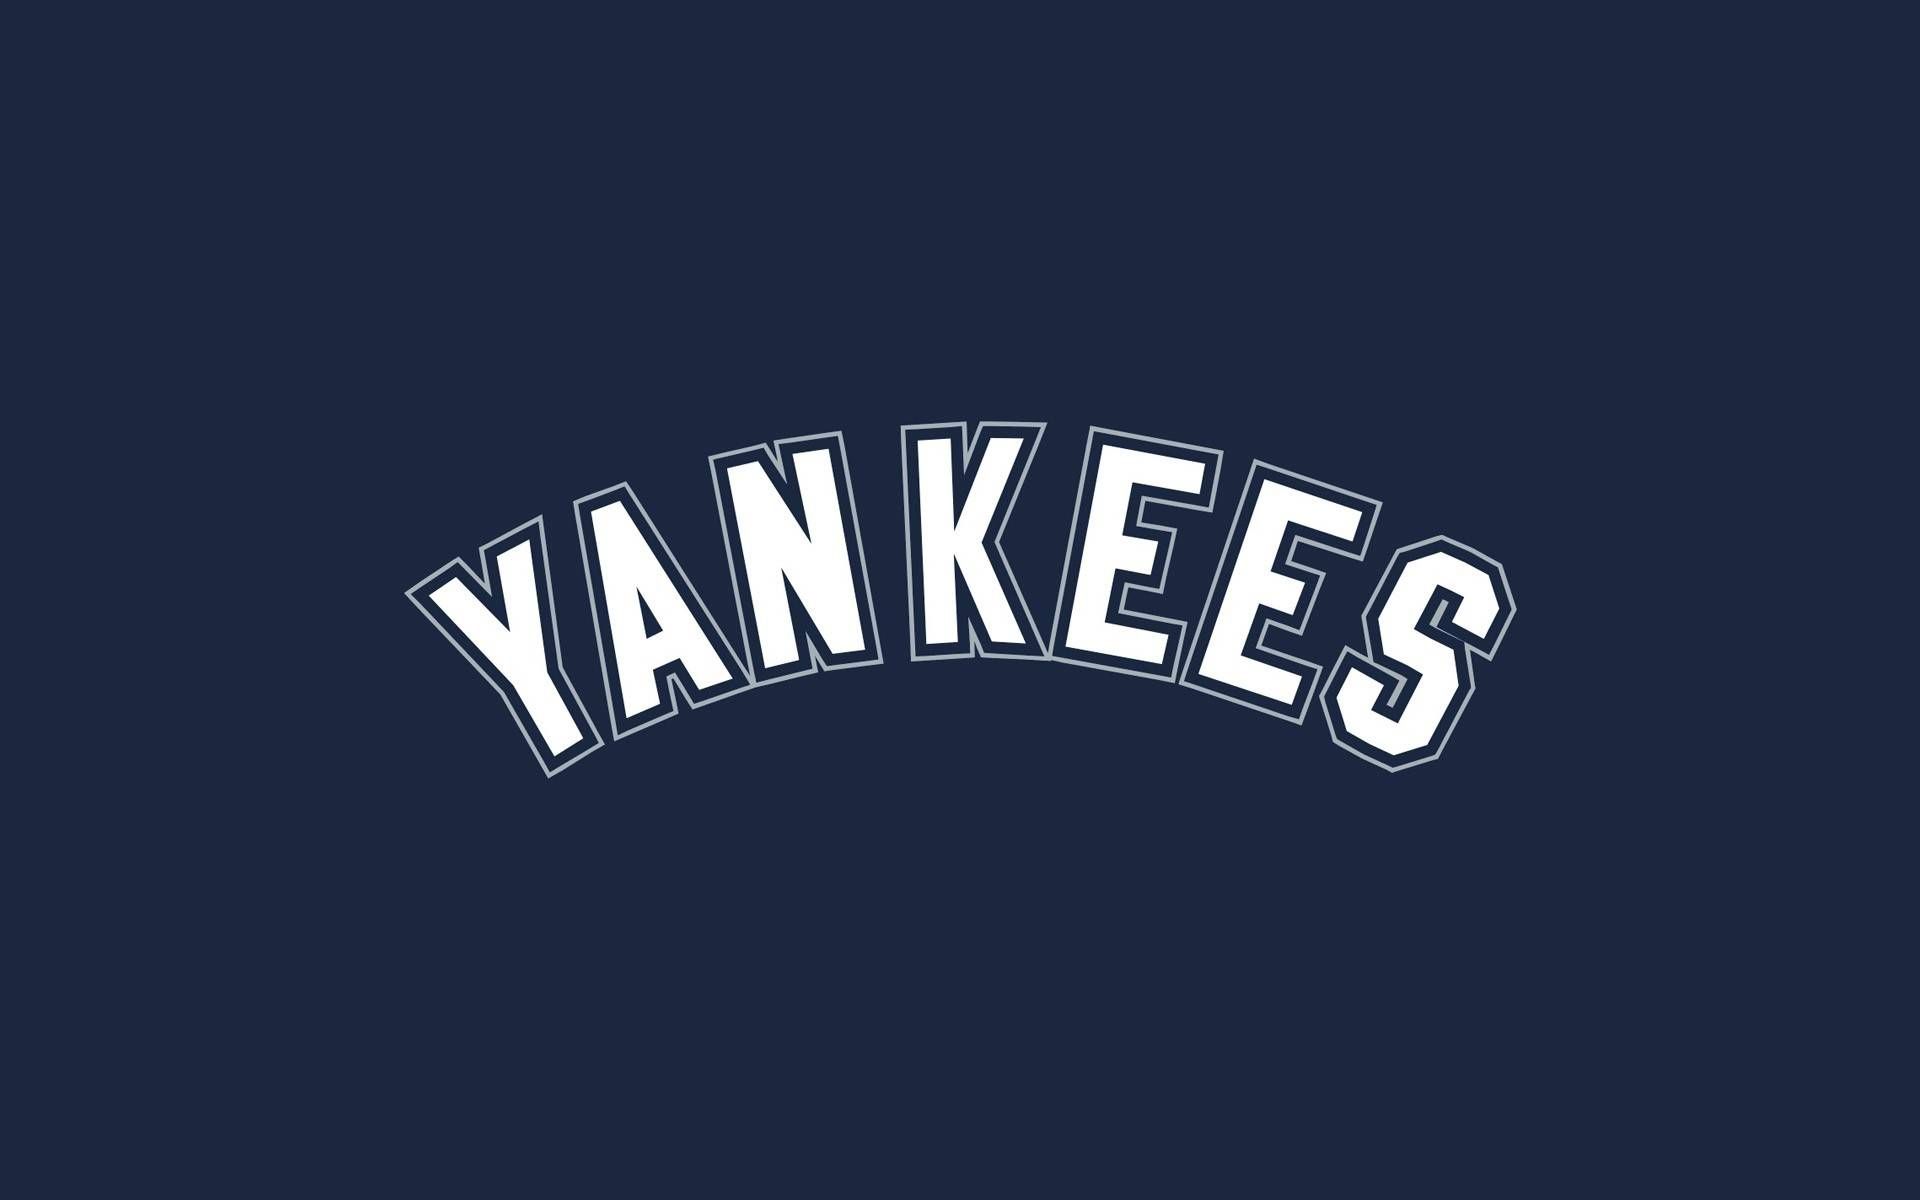 New York Yankees Wallpaper Hd - Free Android Application ...